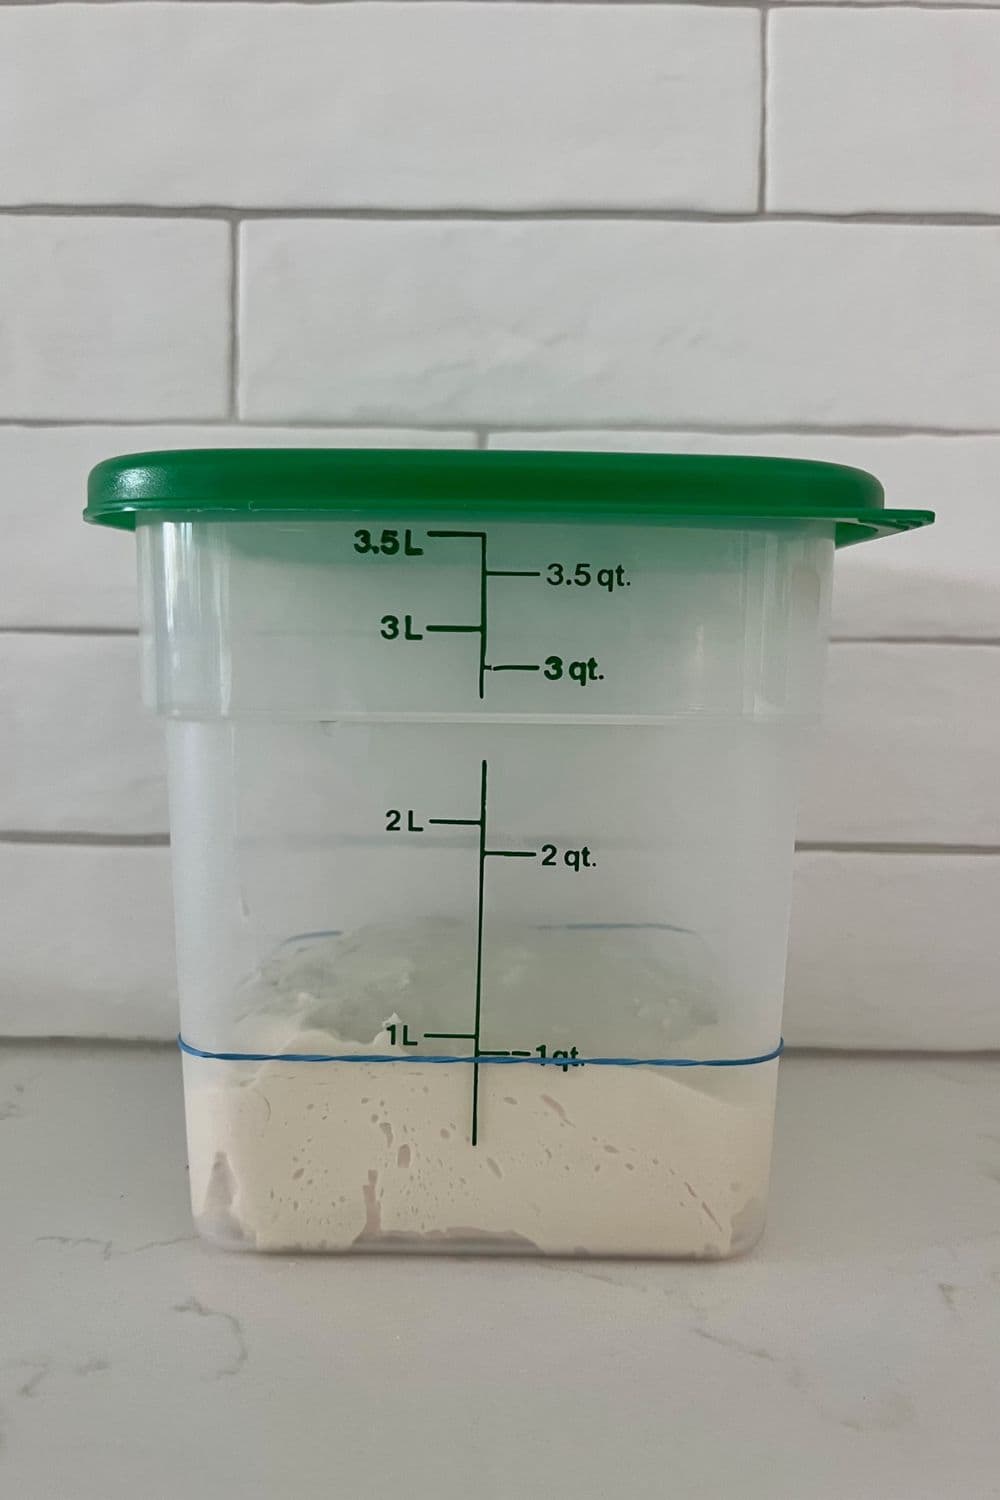 How To Use A Cambro Container for Easy Sourdough Bread Baking